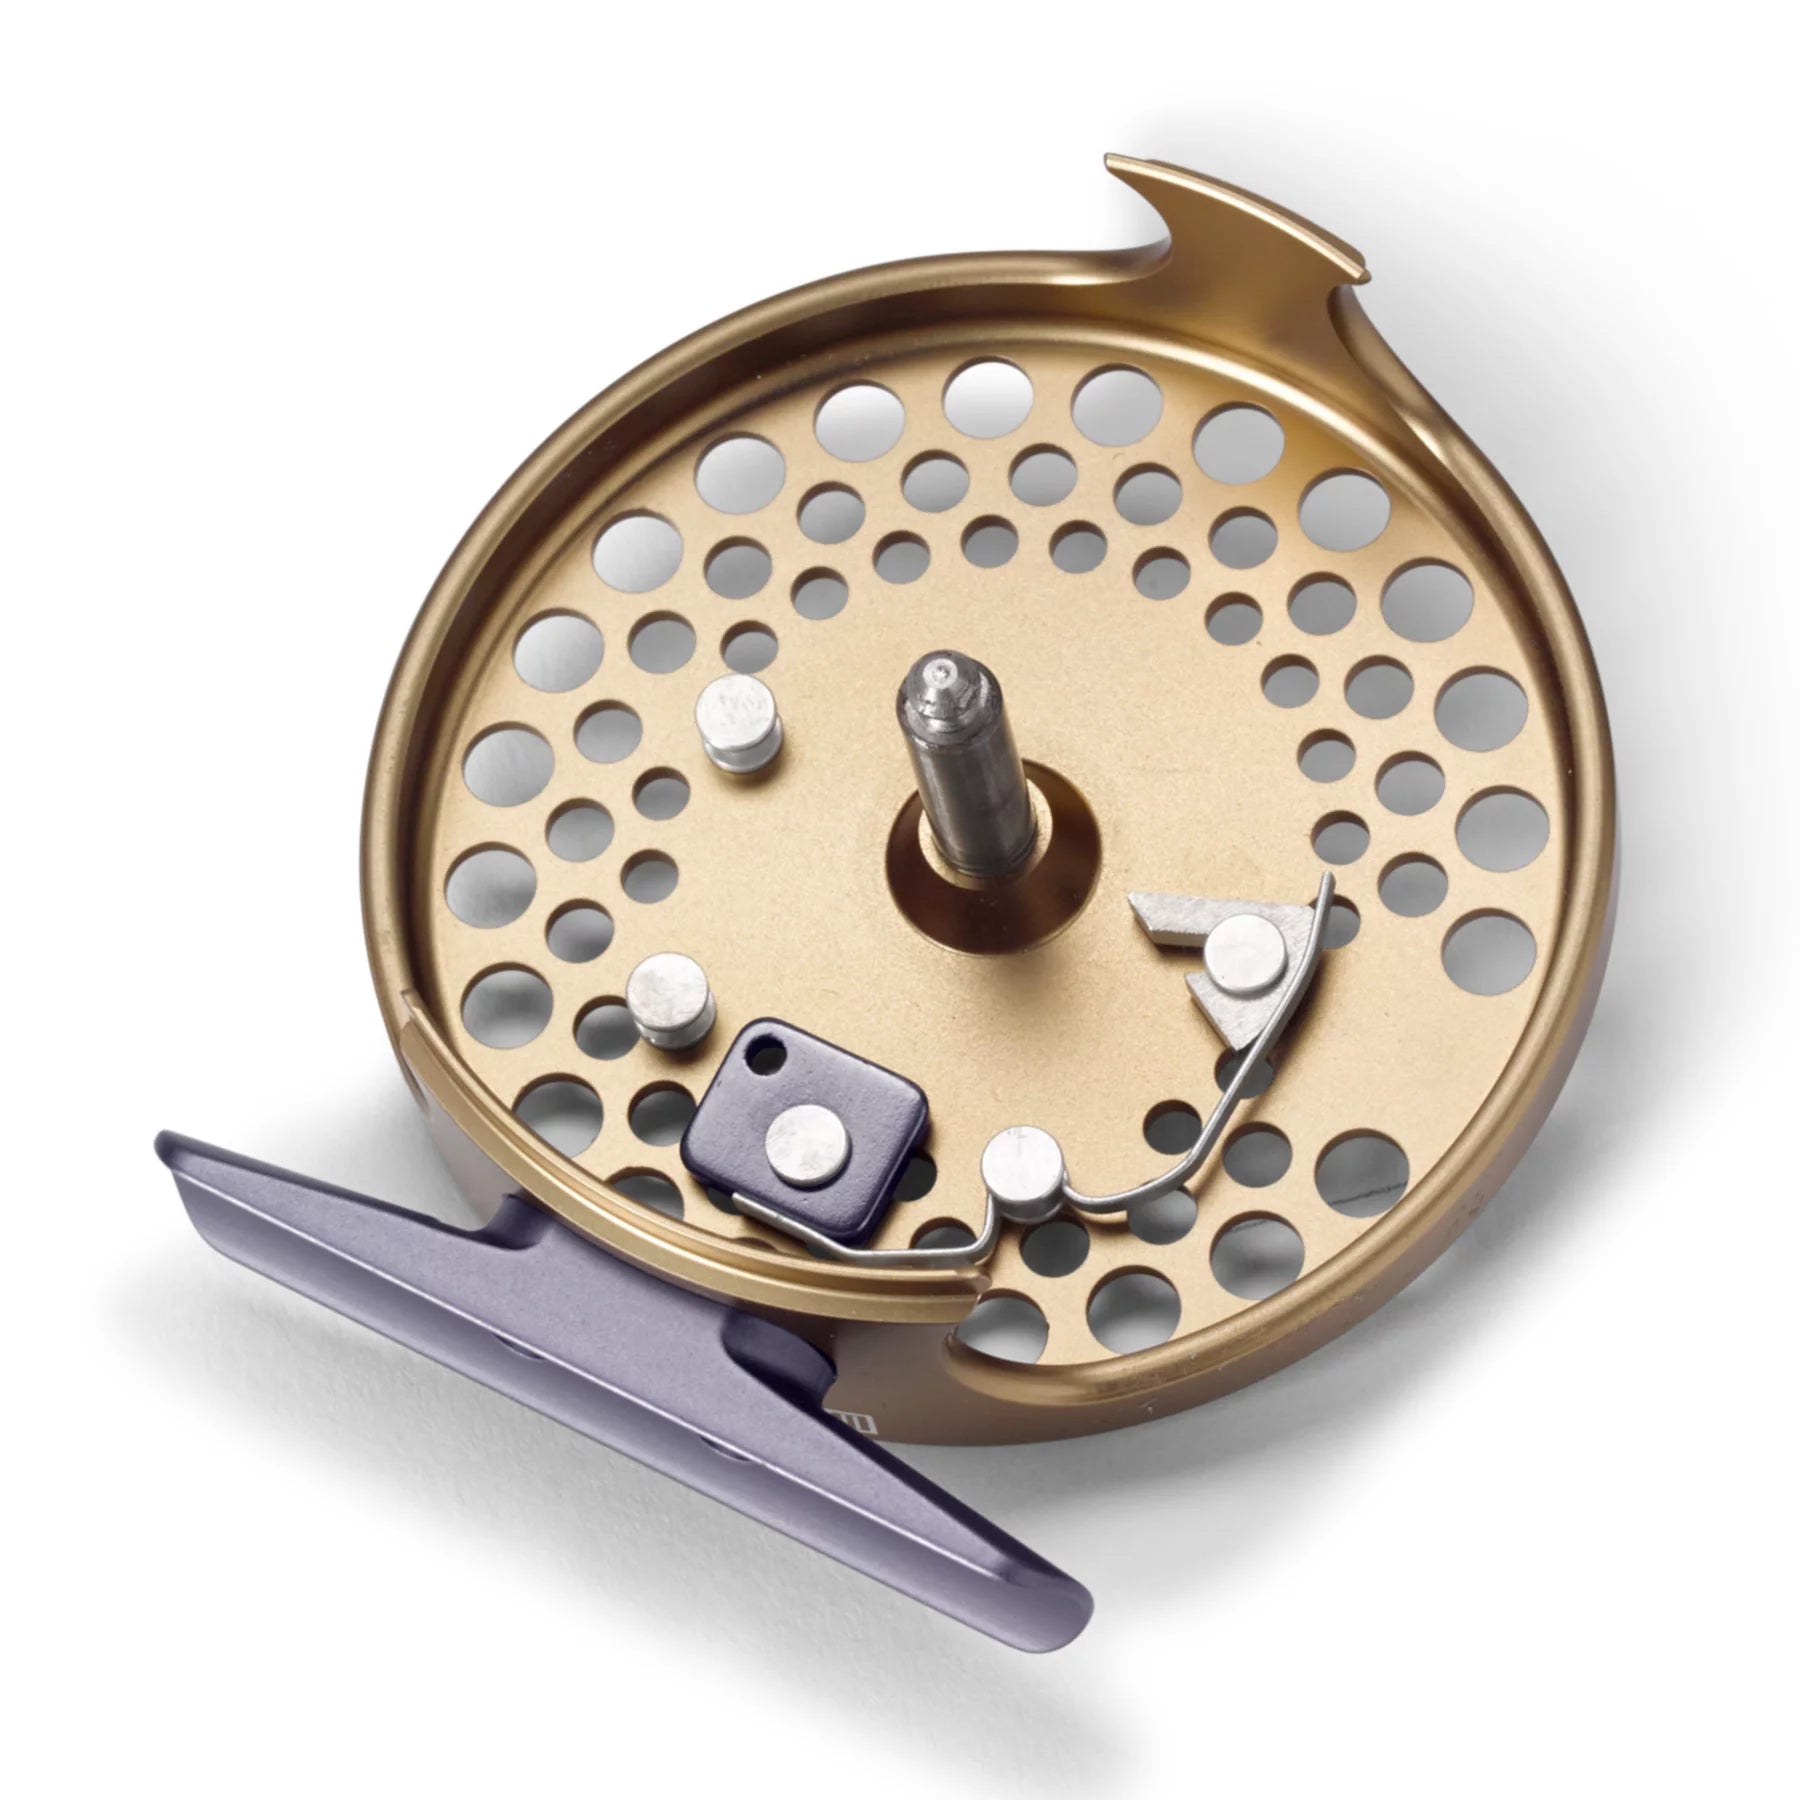 Orvis Battenkill Click-and-Pawl Fly Reel